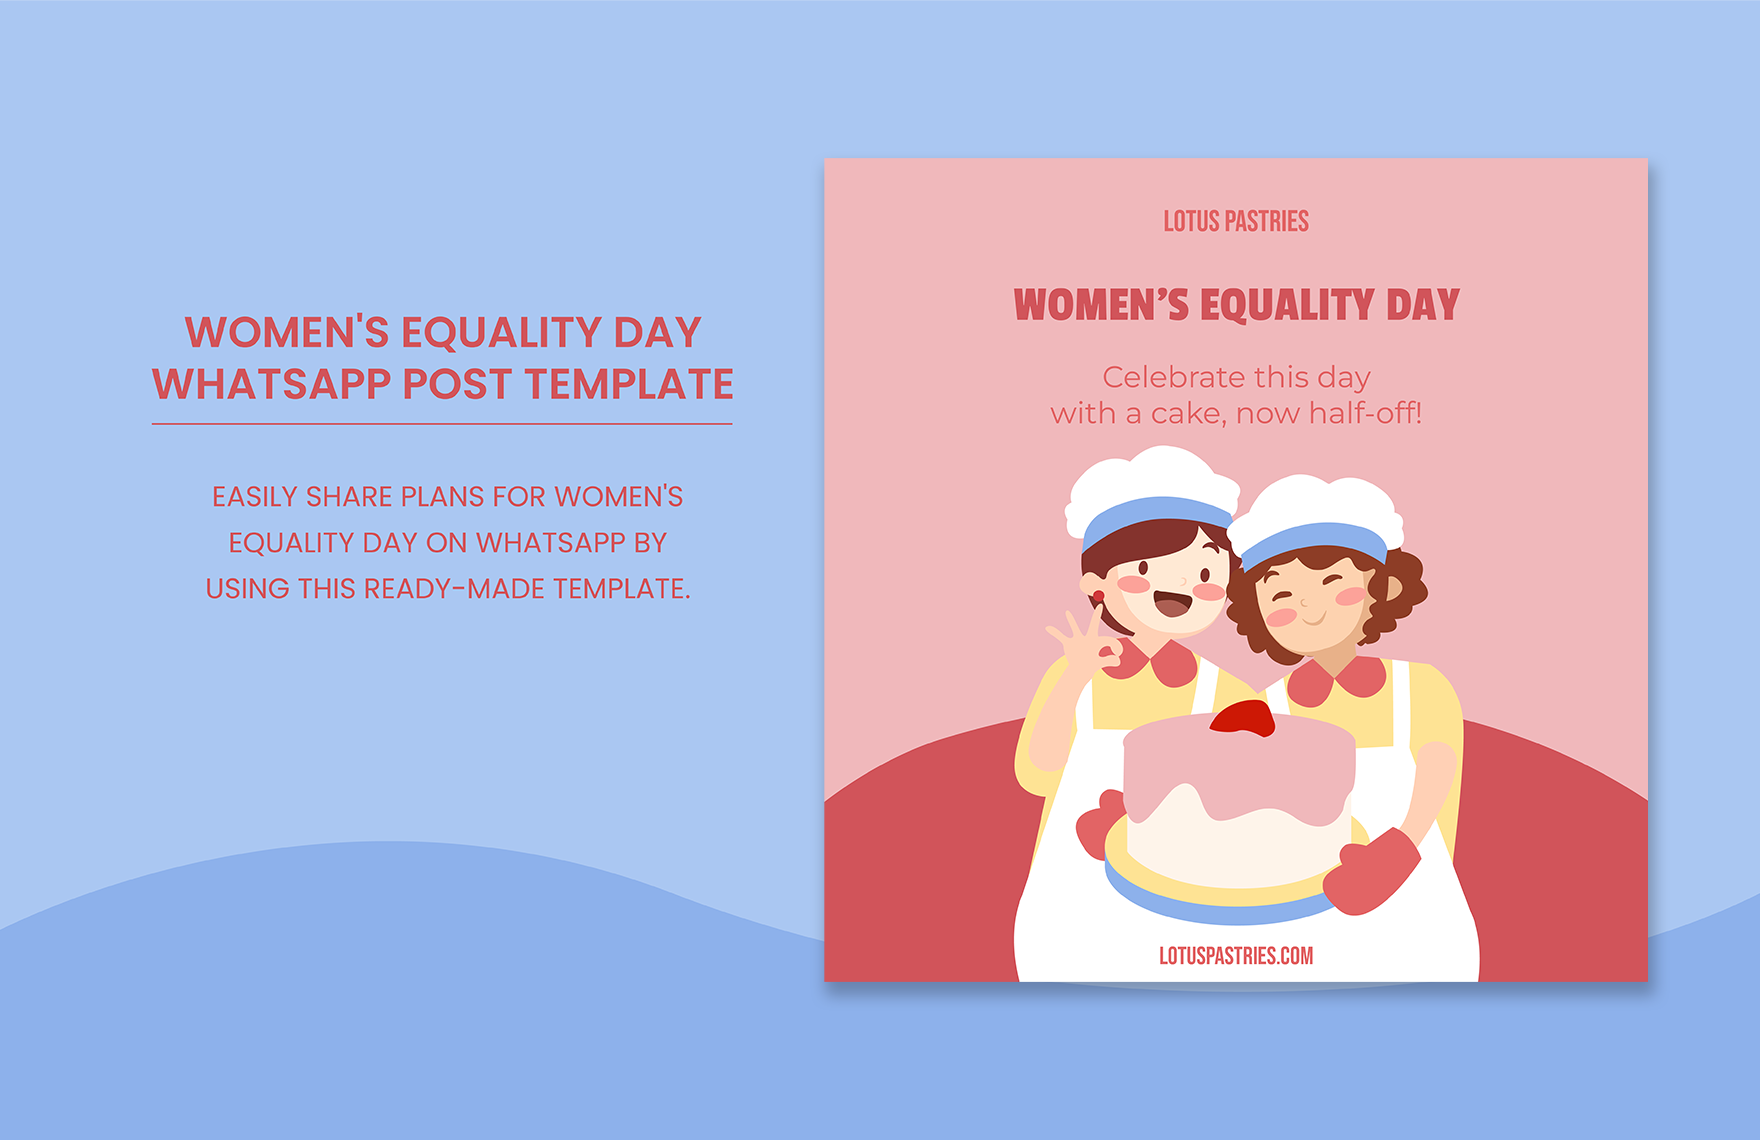 Women's Equality Day WhatsApp Post Template in PDF, Illustrator, SVG, PNG